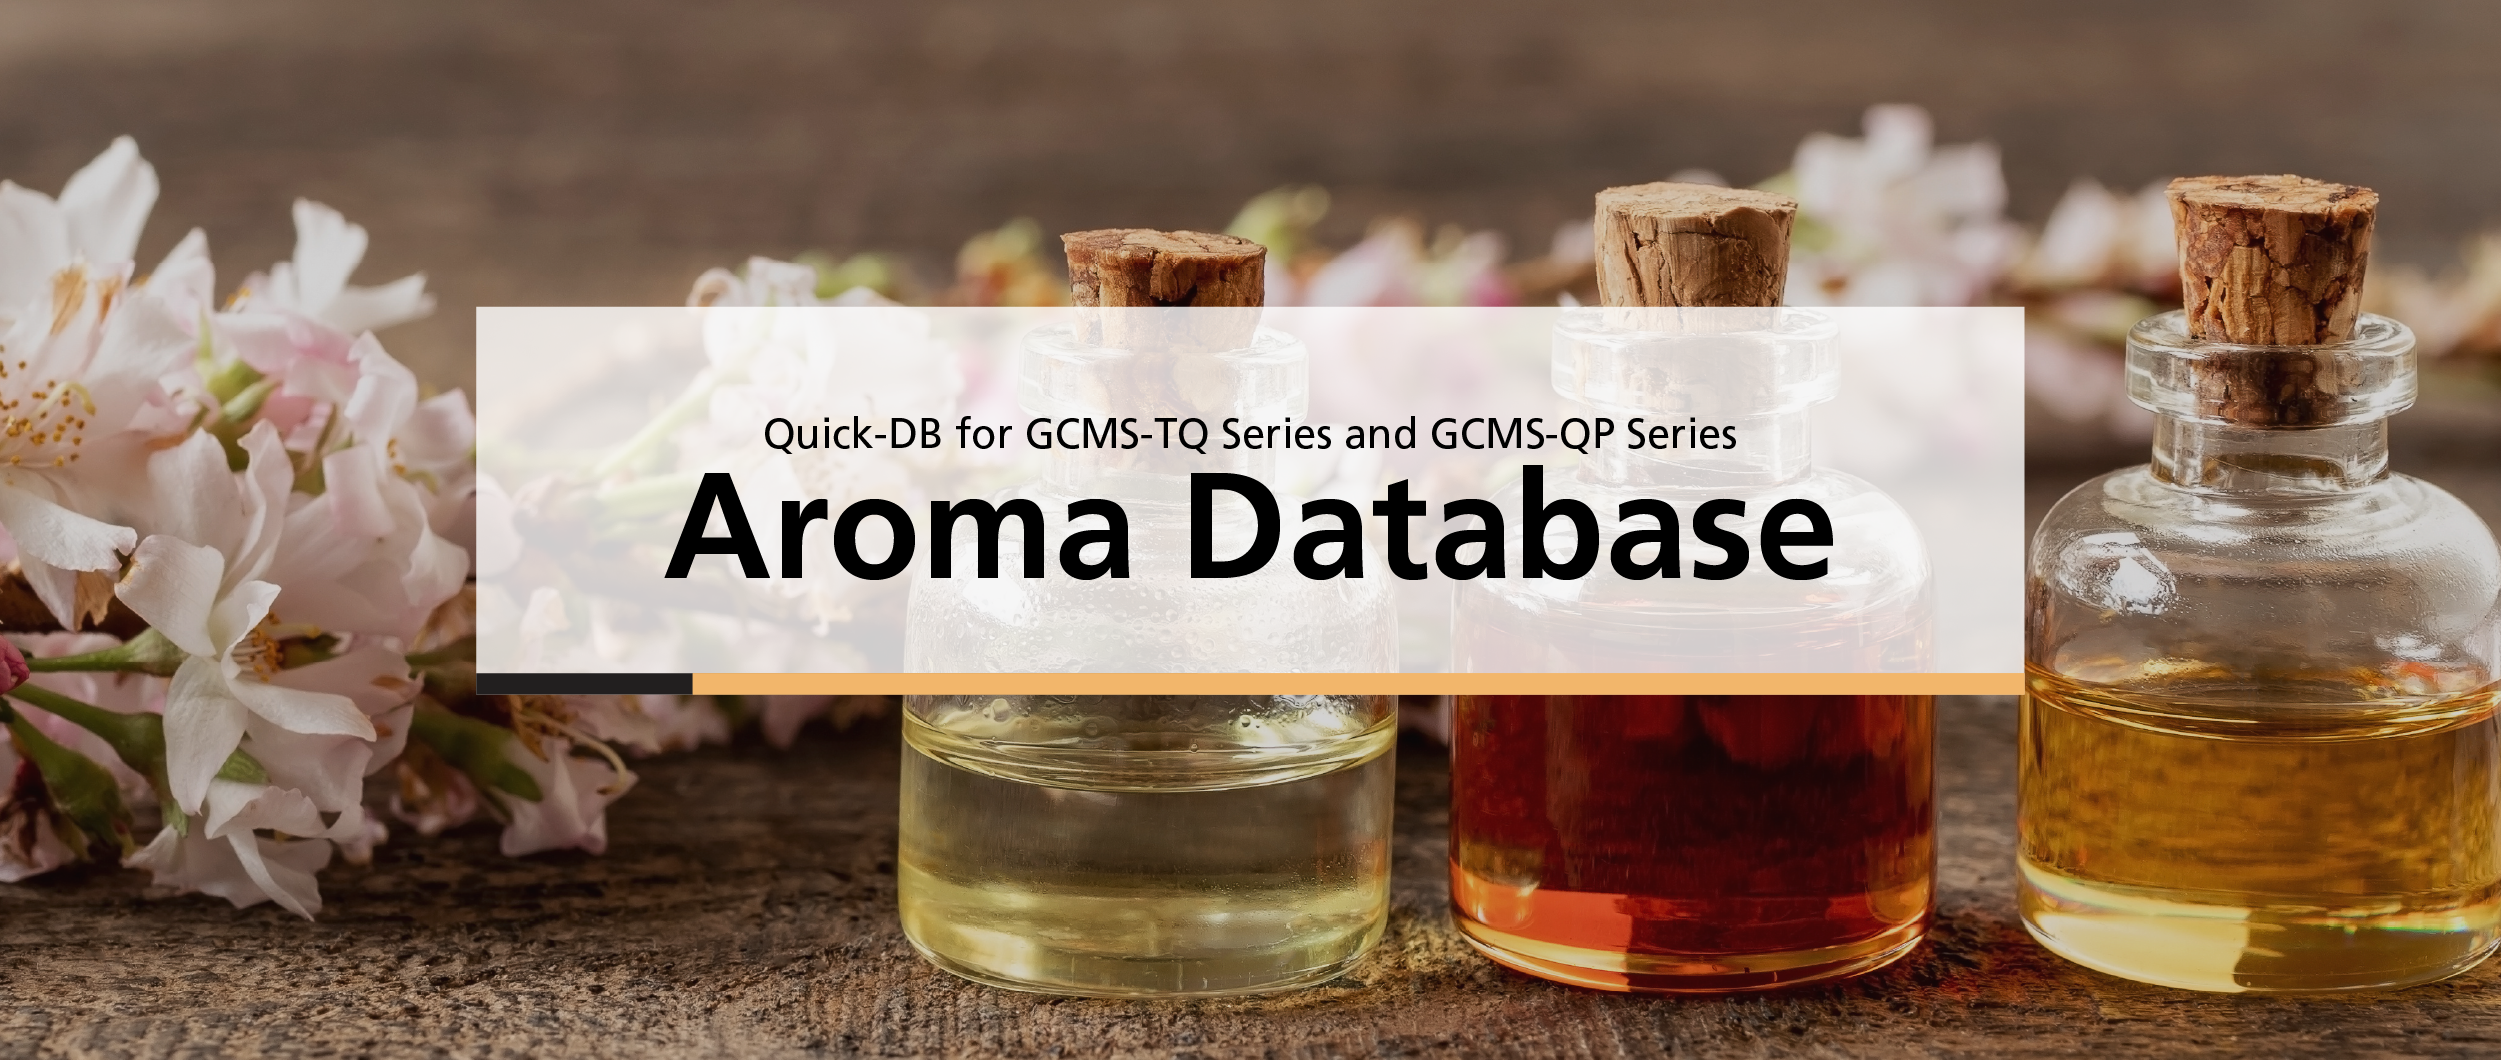 Quick DB for GCMS-TQ Series and GCMS-QP Series Aroma Database